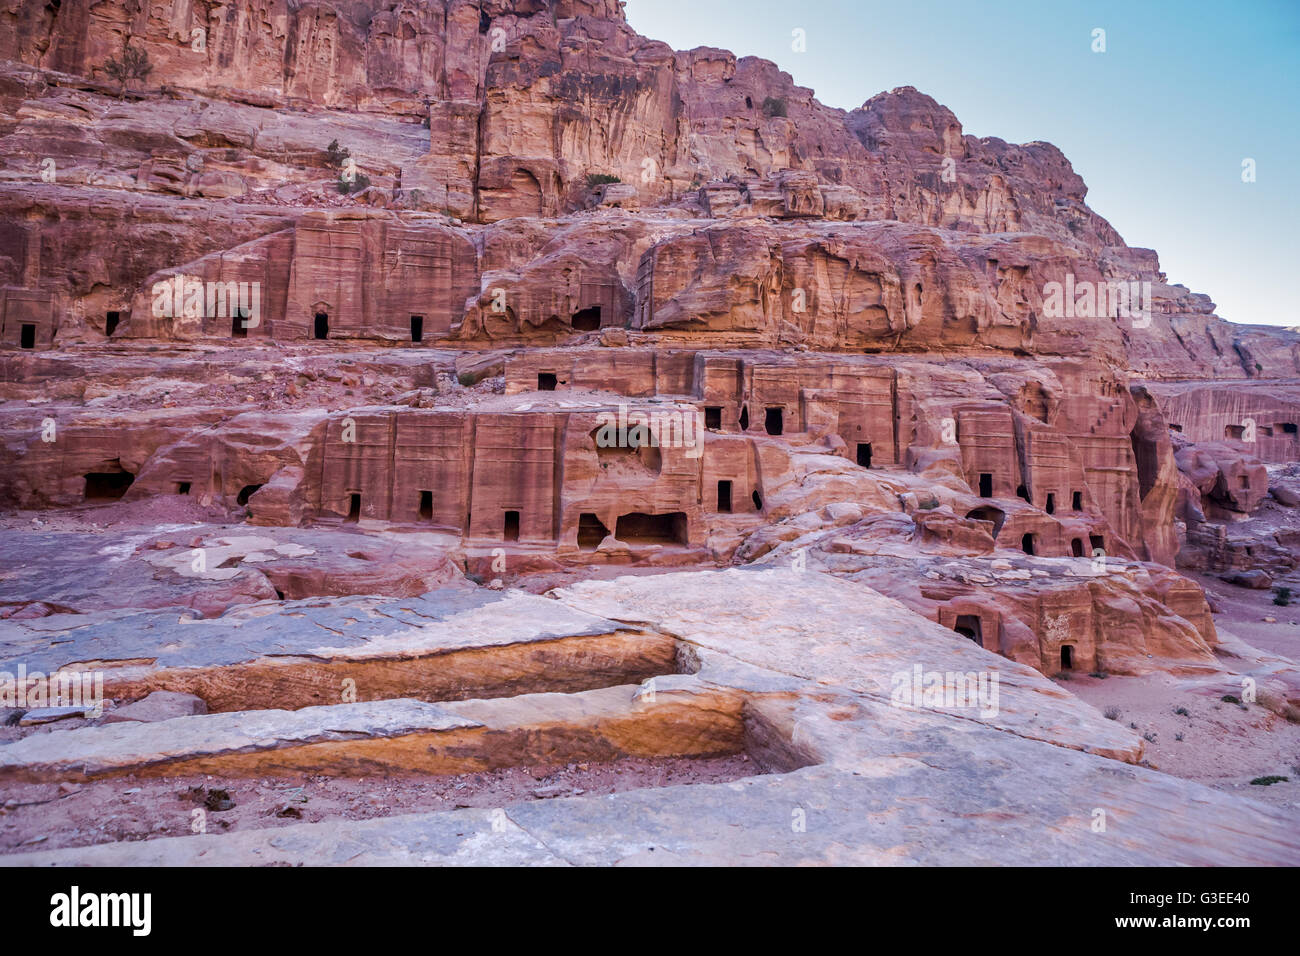 Cave of tombs in the ancient city of Petra, Jordan. It is know as the Loculi. Petra has led to its designation as a UNESCO World Heritage Site. Stock Photo